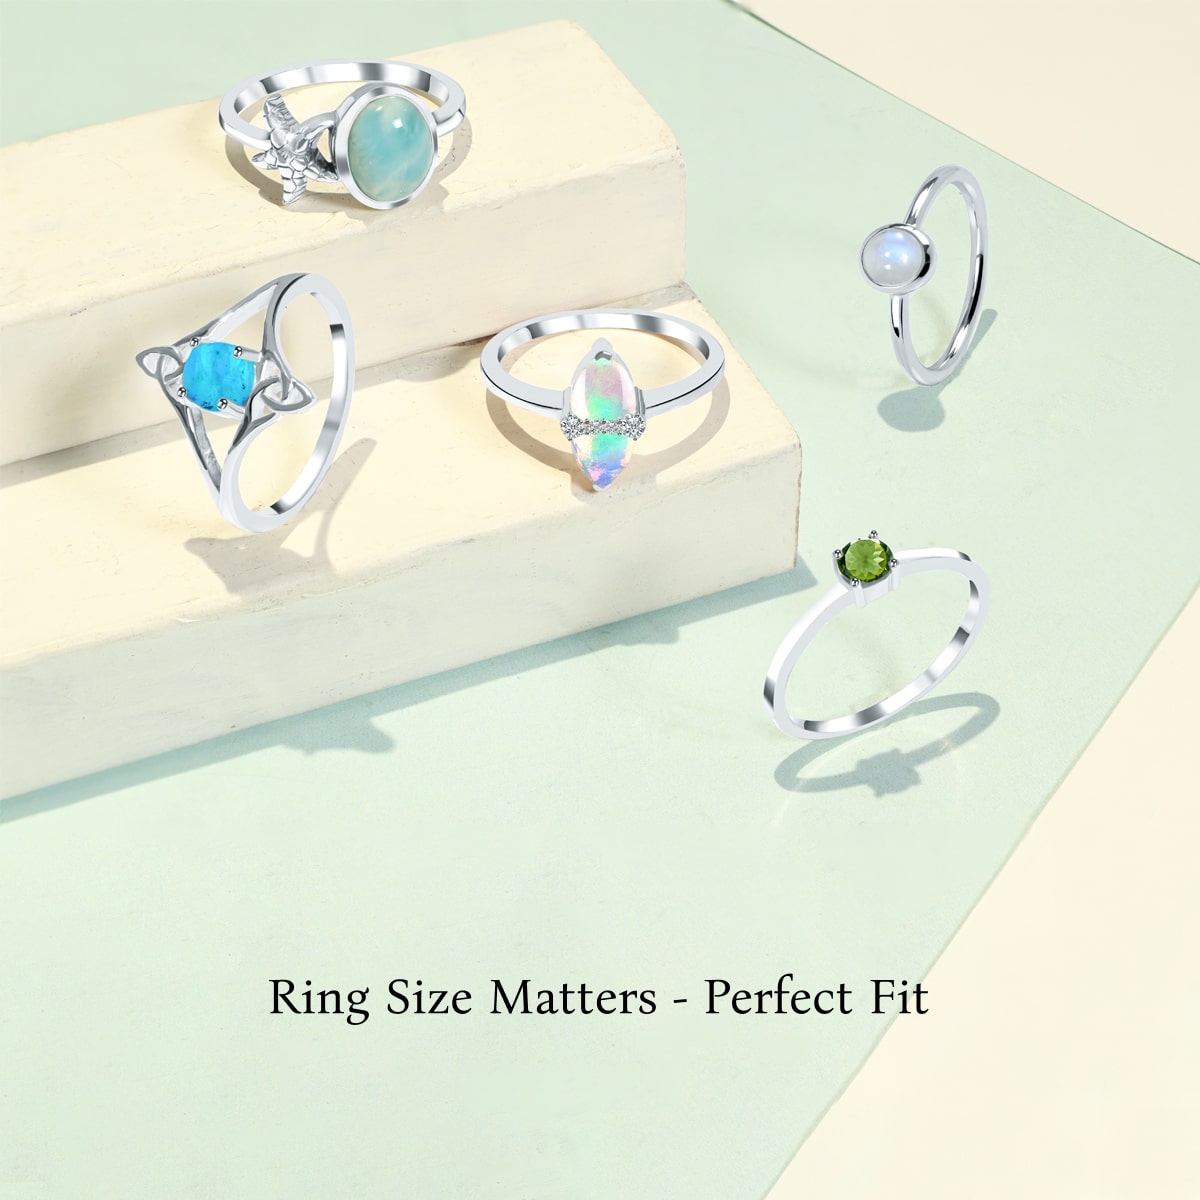 Ensuring the Right Fit: Ring Size Matters